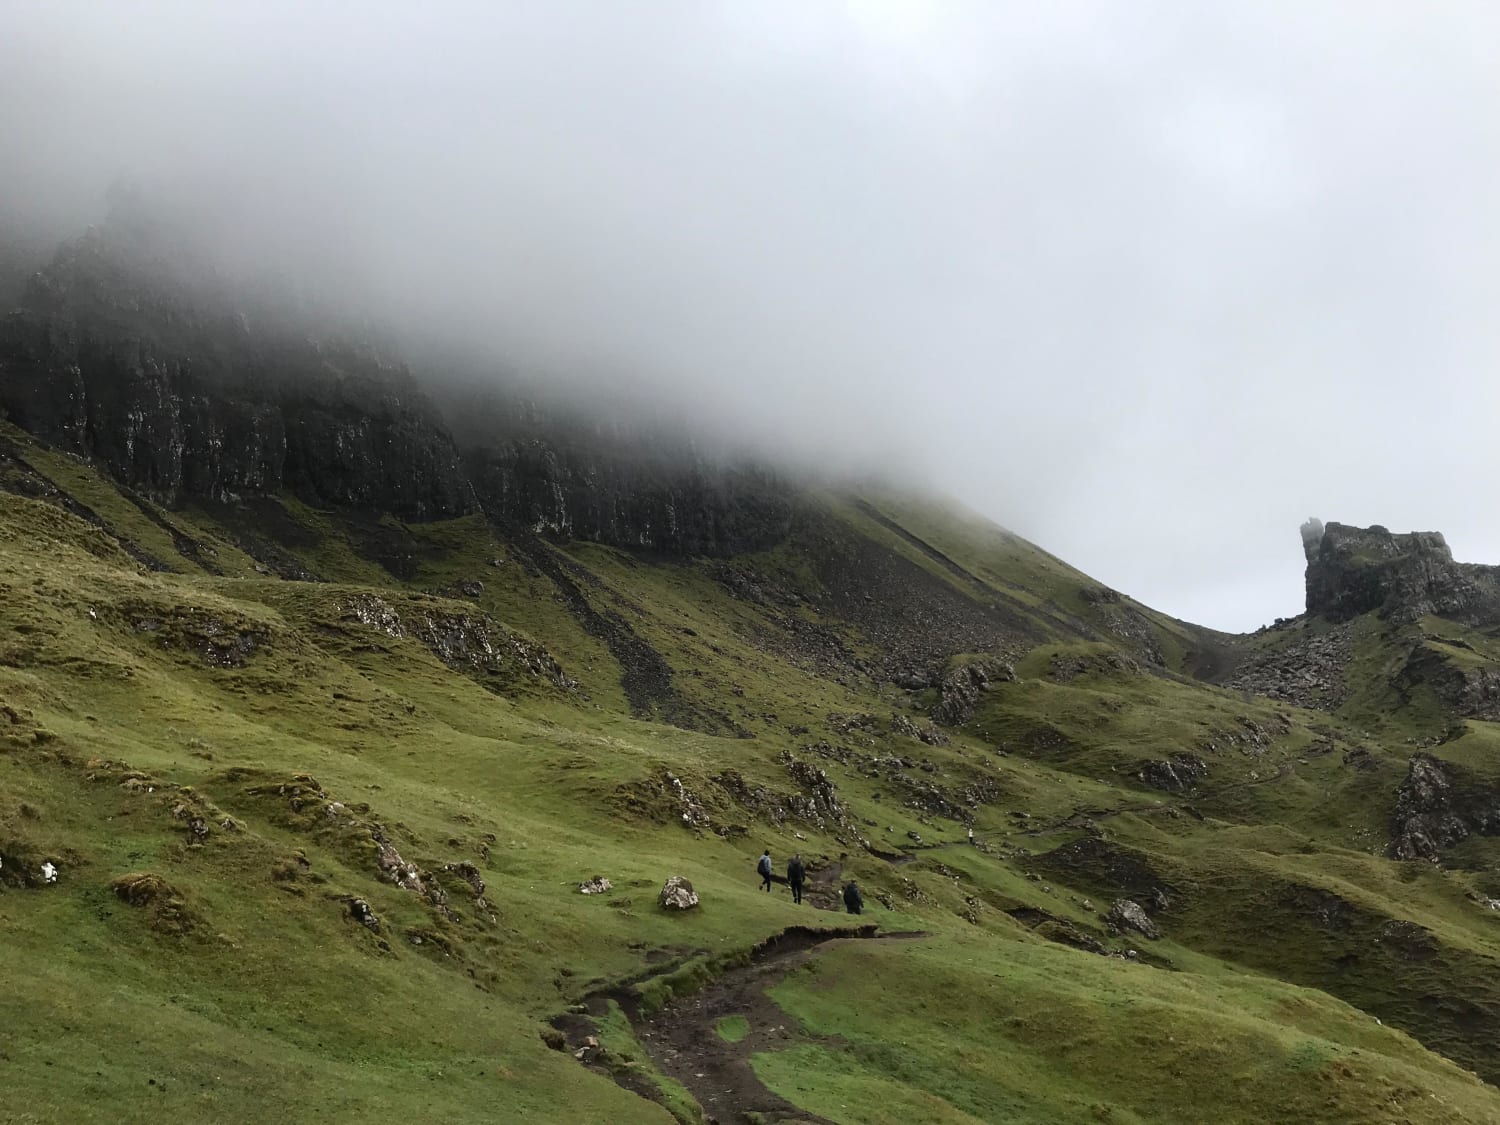 A hike through Quiraing during my trip to Scotland last year had some of the best views I have ever seen.